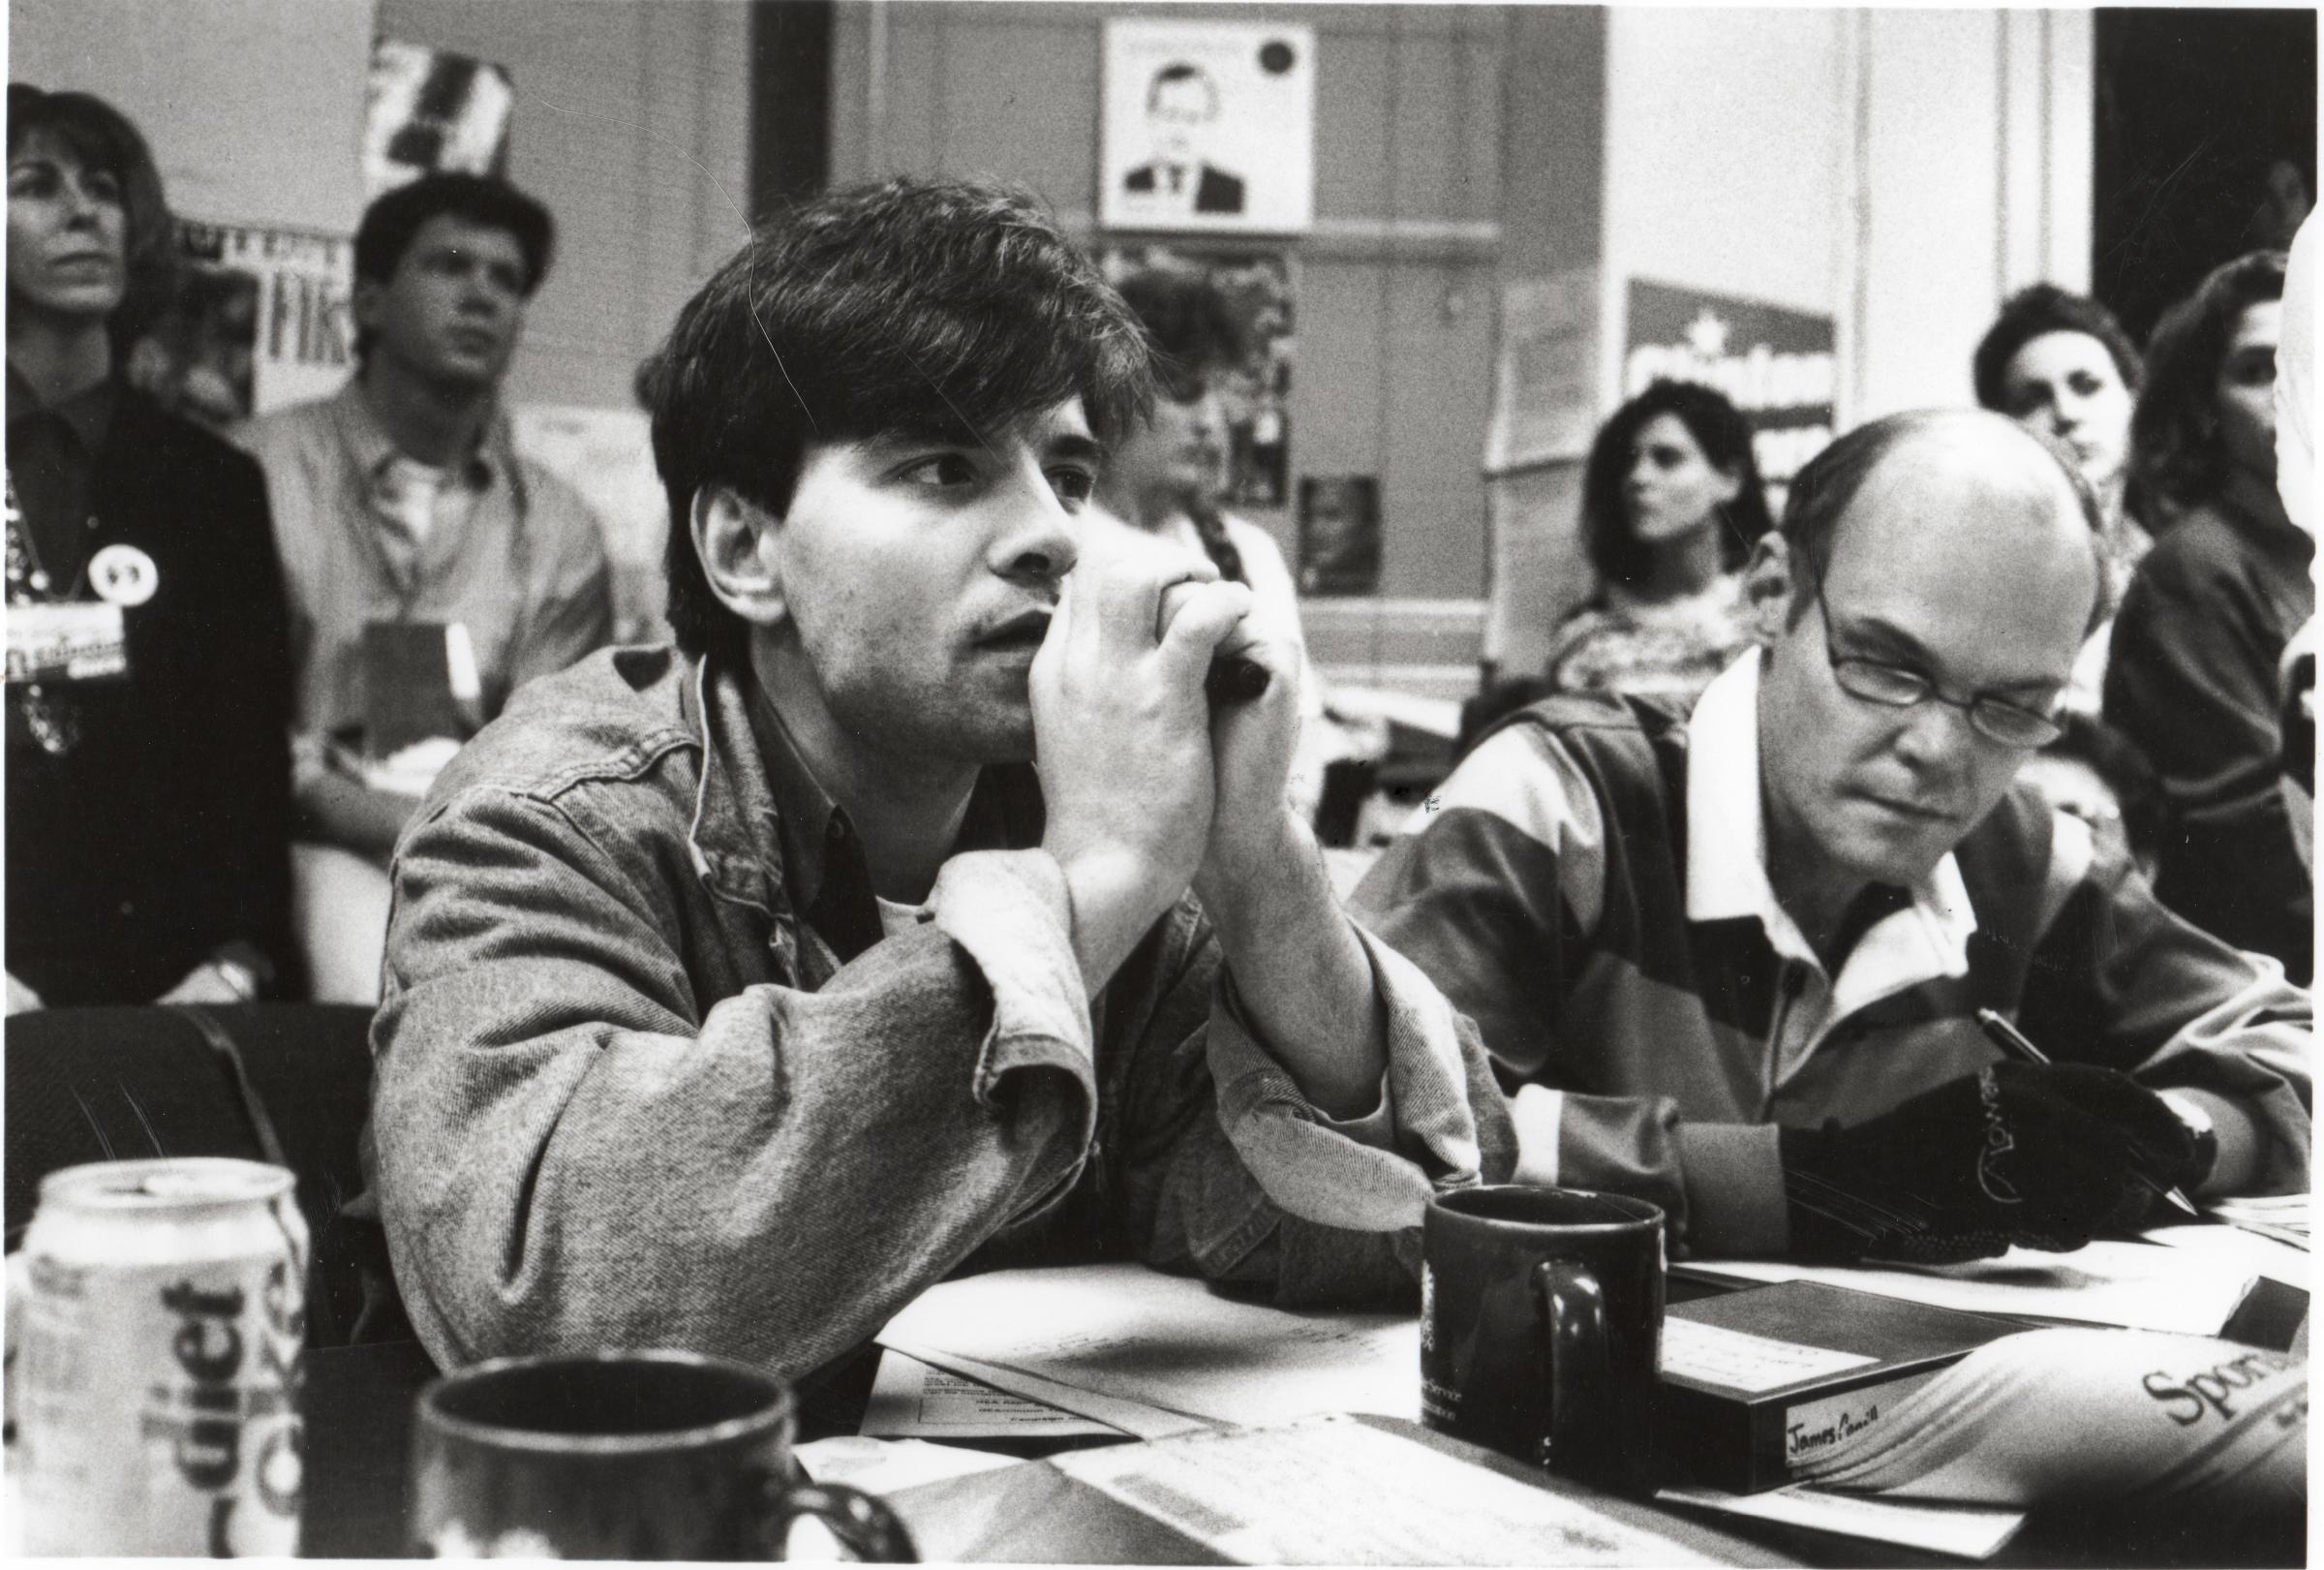 George Stephanopoulos (left) and James Carville (right) in a still from The War Room, 1993.